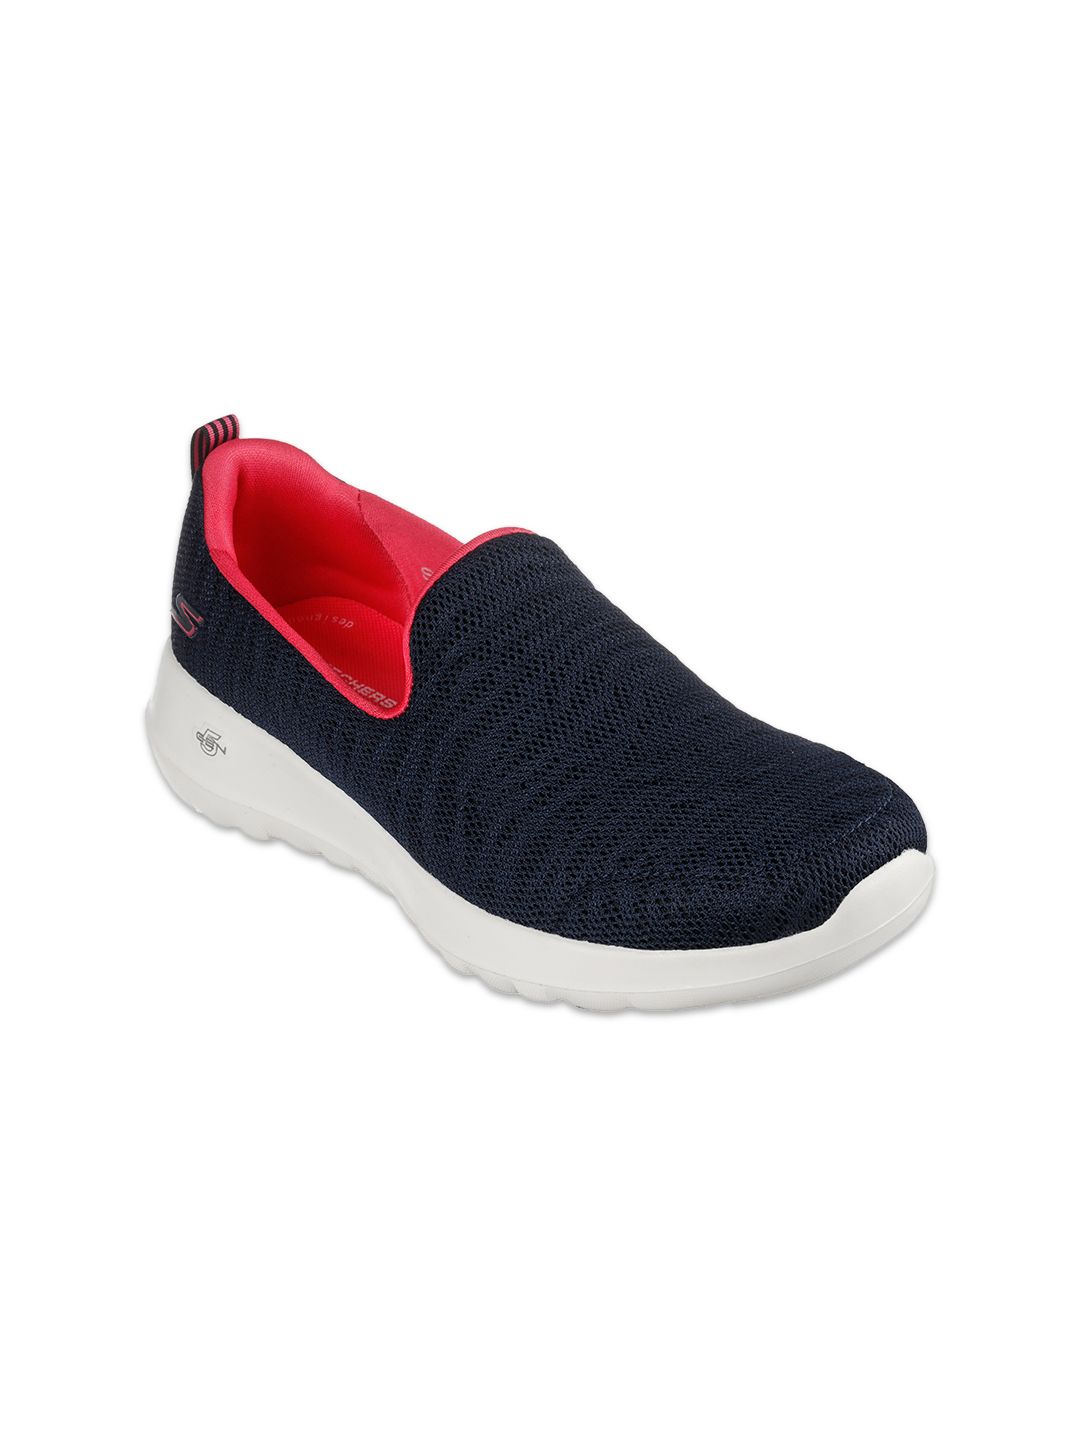 Skechers Women Navy Blue Mesh Walking TRULY INSPIRED Non-Marking Shoes Price in India